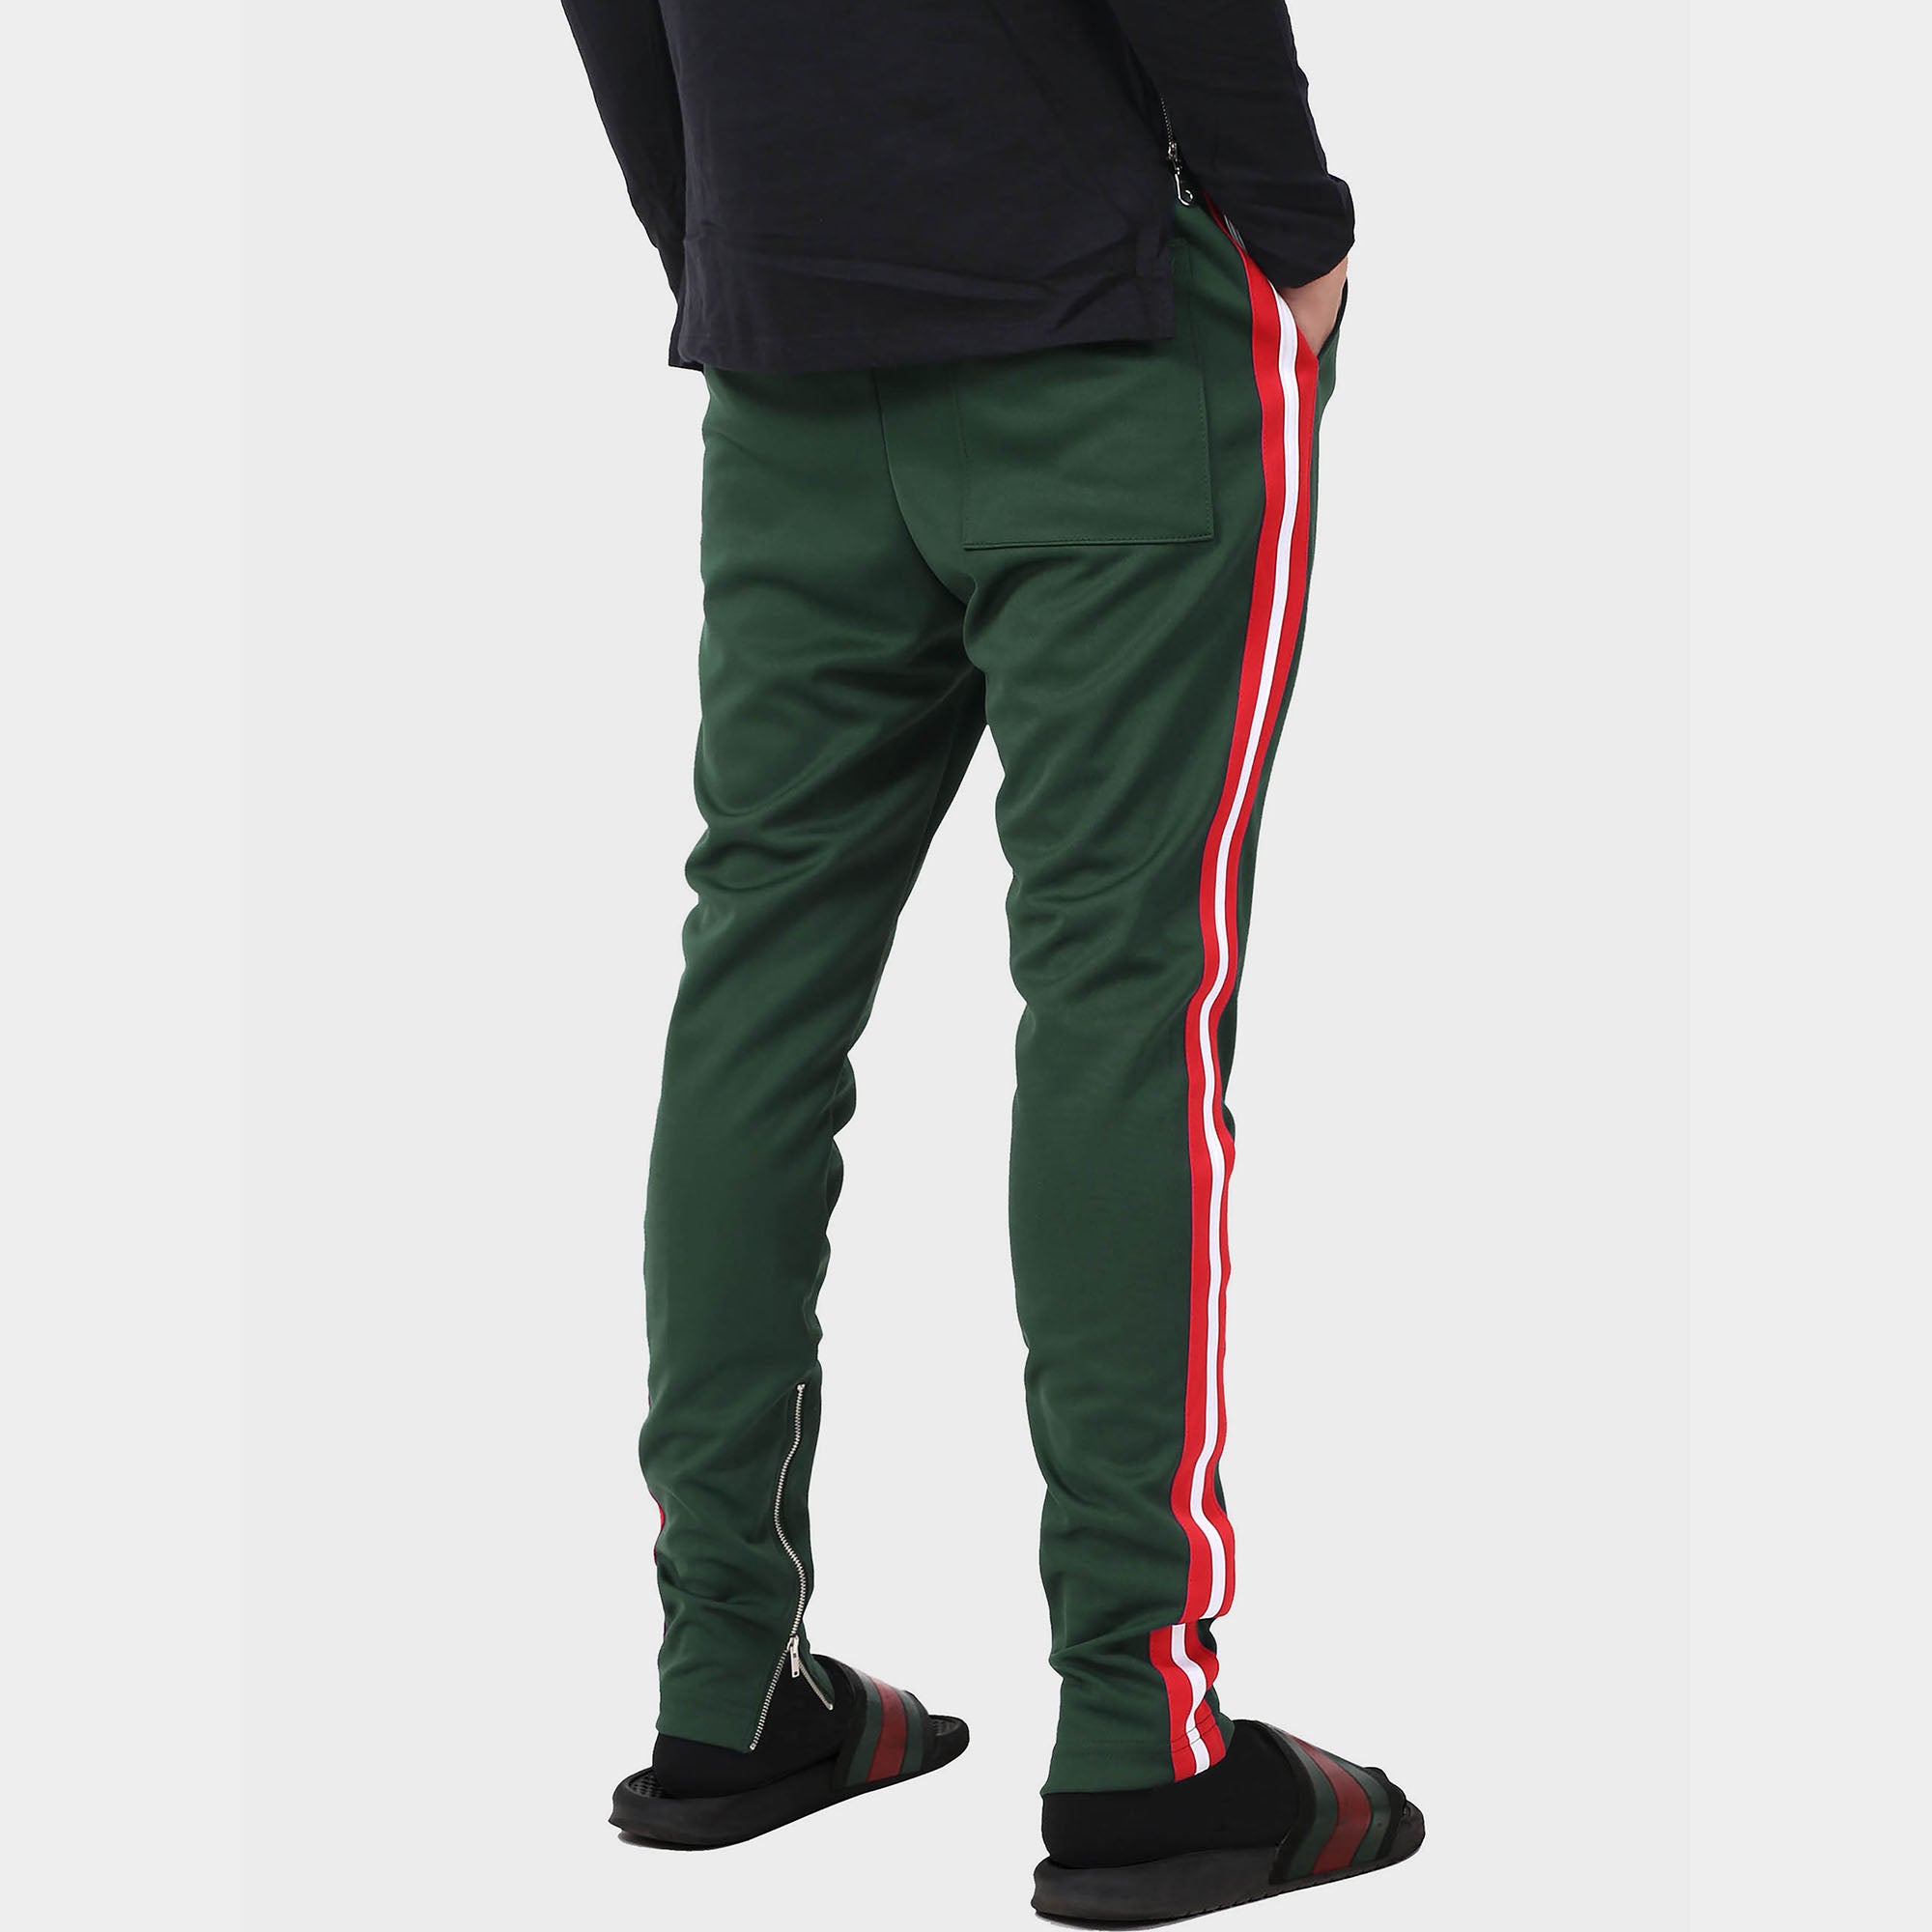 jogger_striped joggers_striped sweatpants_velvet joggers mens_sweatpants_side stripe joggers mens_champion sweatpants_champion joggers_mens joggers_Hunter Green/Red/White